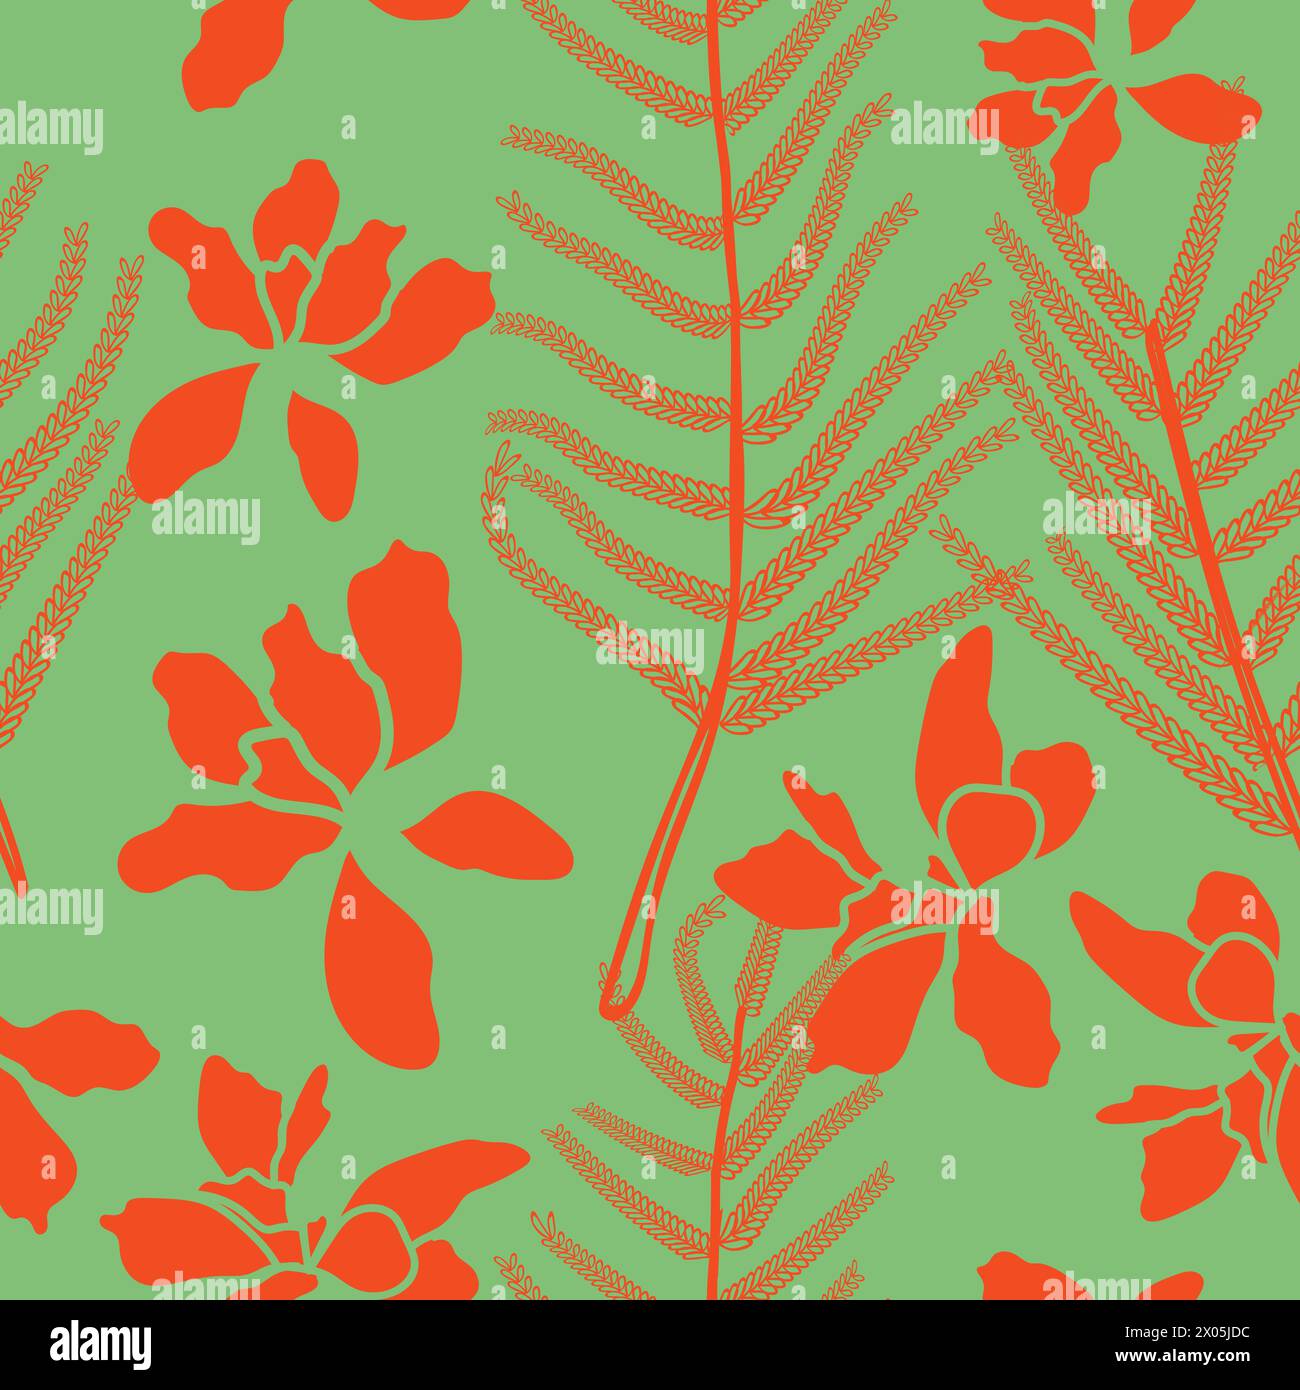 Floral vector seamless pattern background. Mimosa pudica leaves illustration textile design. Commonly found in the Southern United States.  Stock Vector